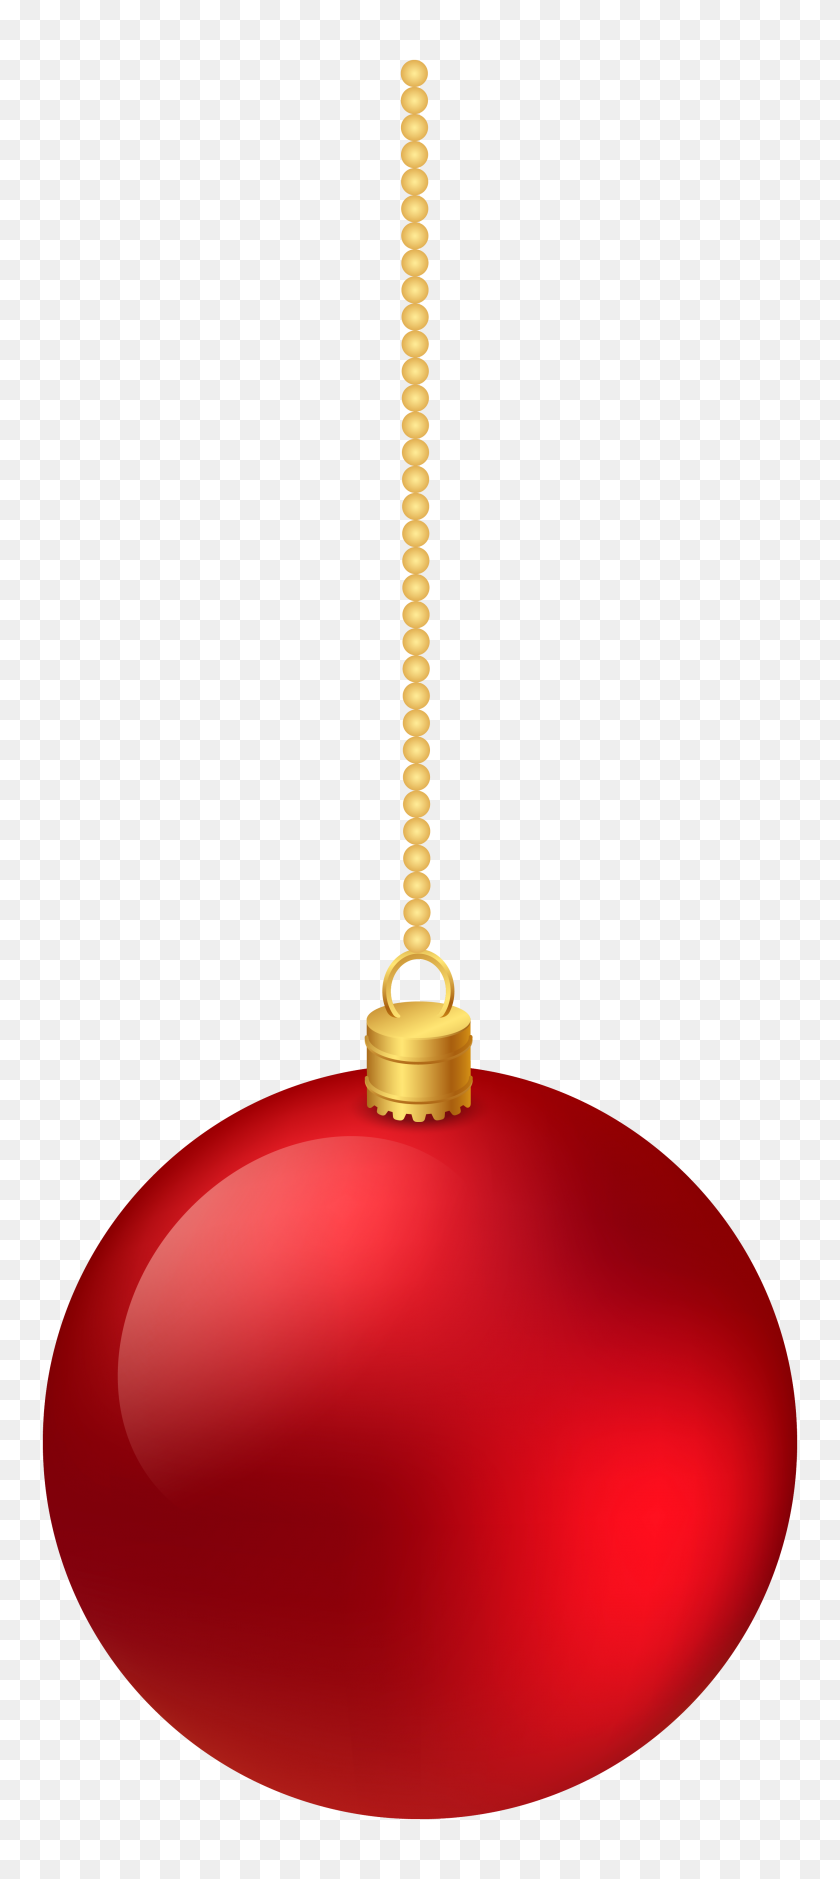 Christmas Classic Red Hanging Ball Png Clipart Gallery - Red Ball PNG ...